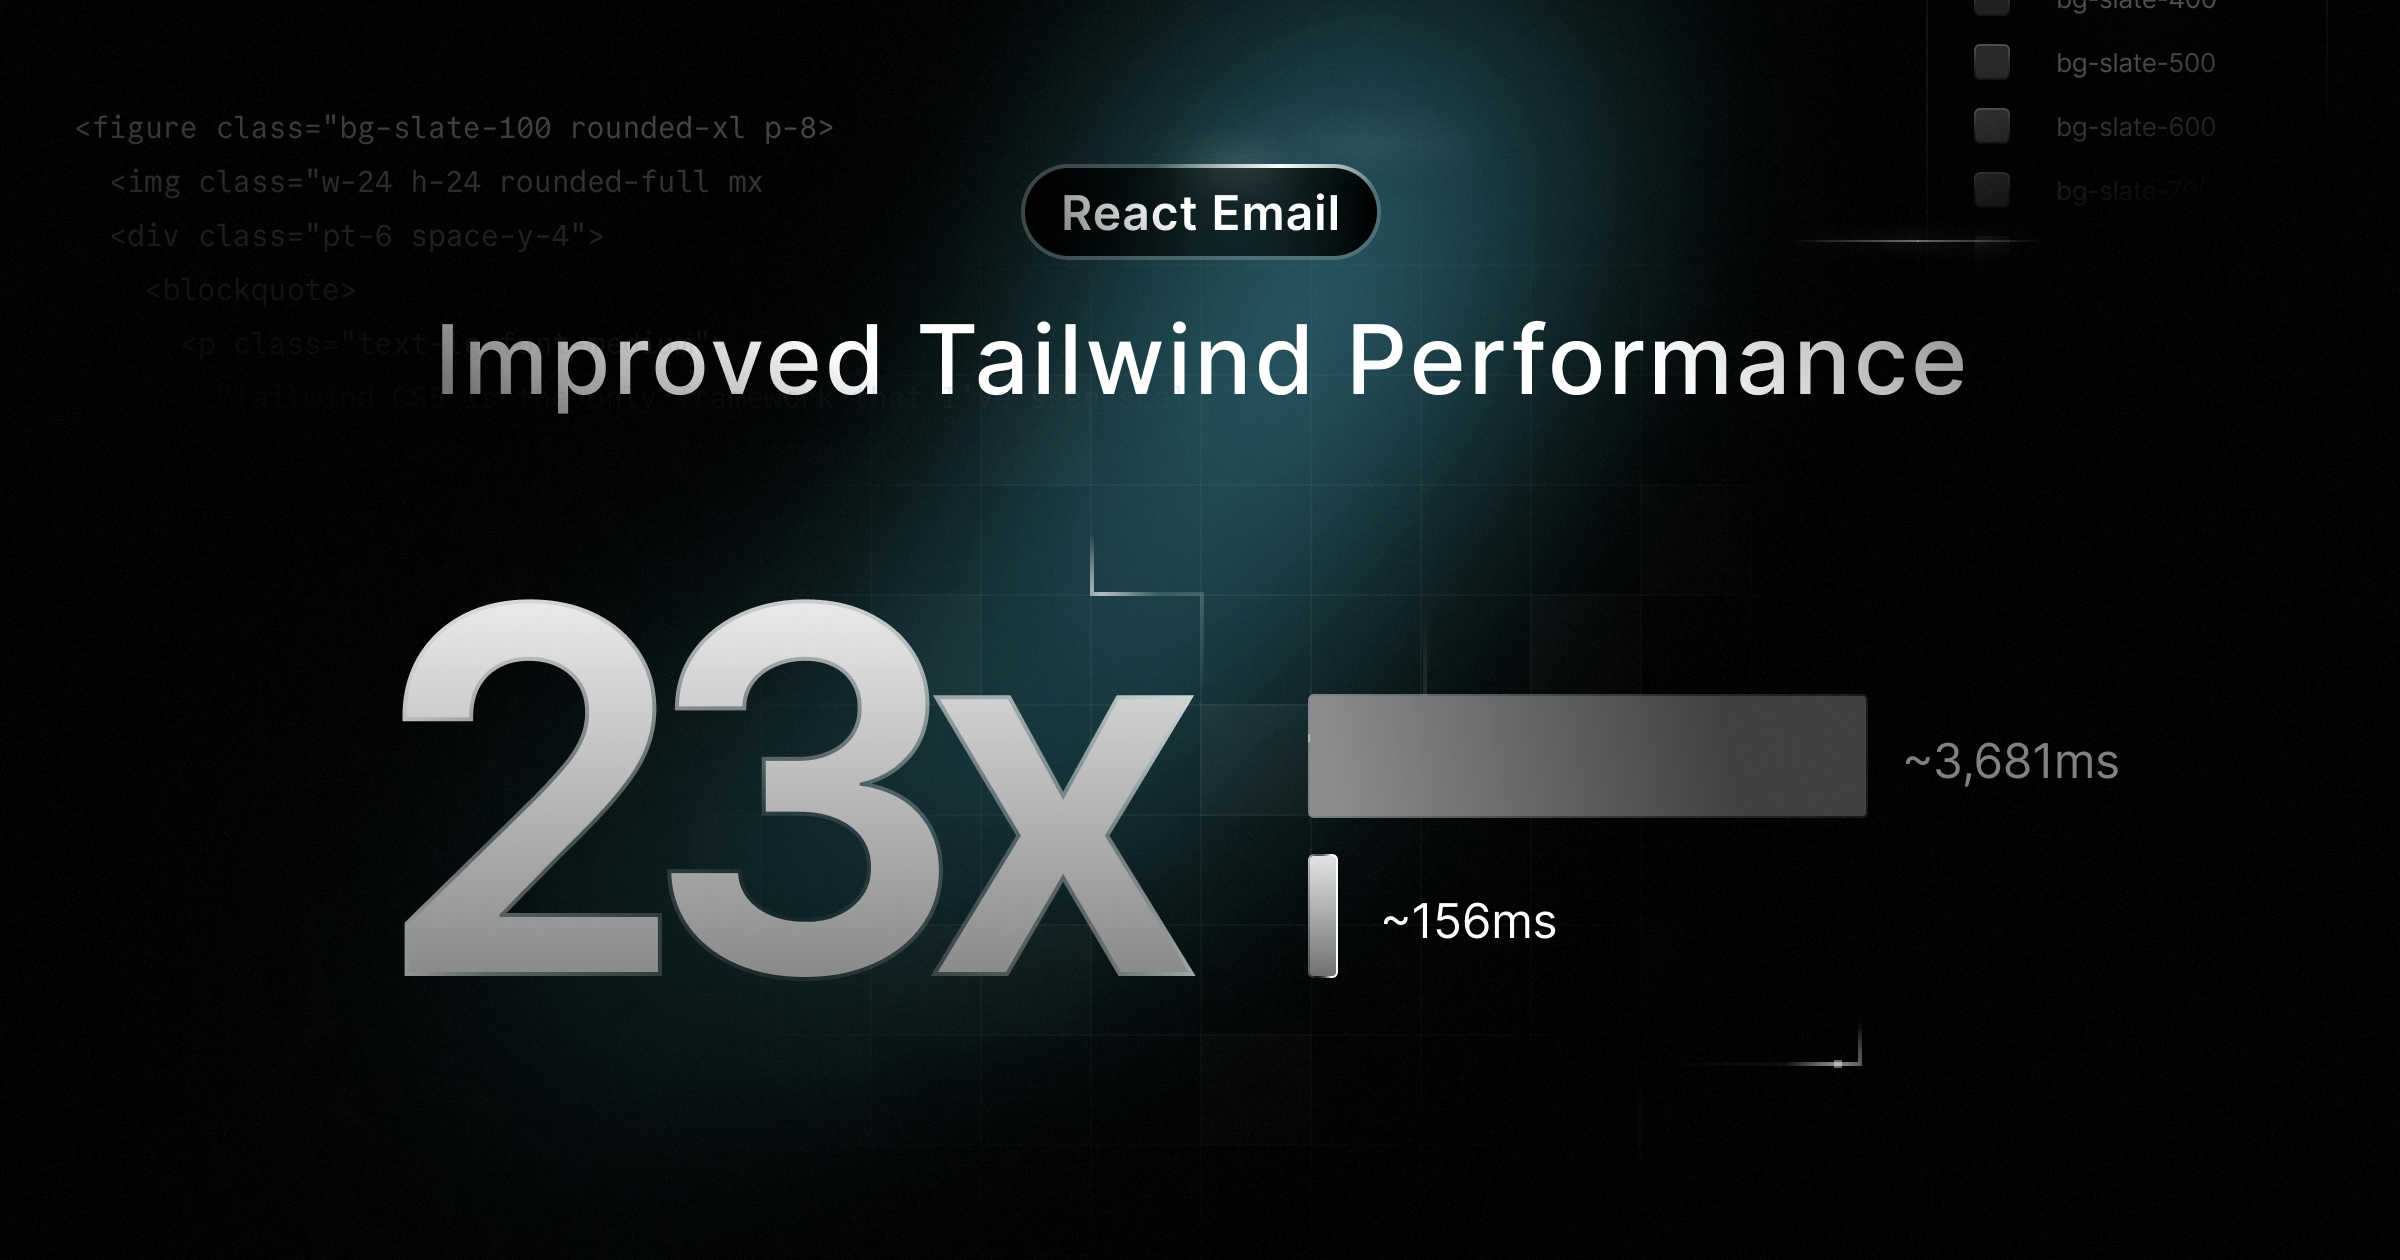 Improved Performance for Tailwind Emails